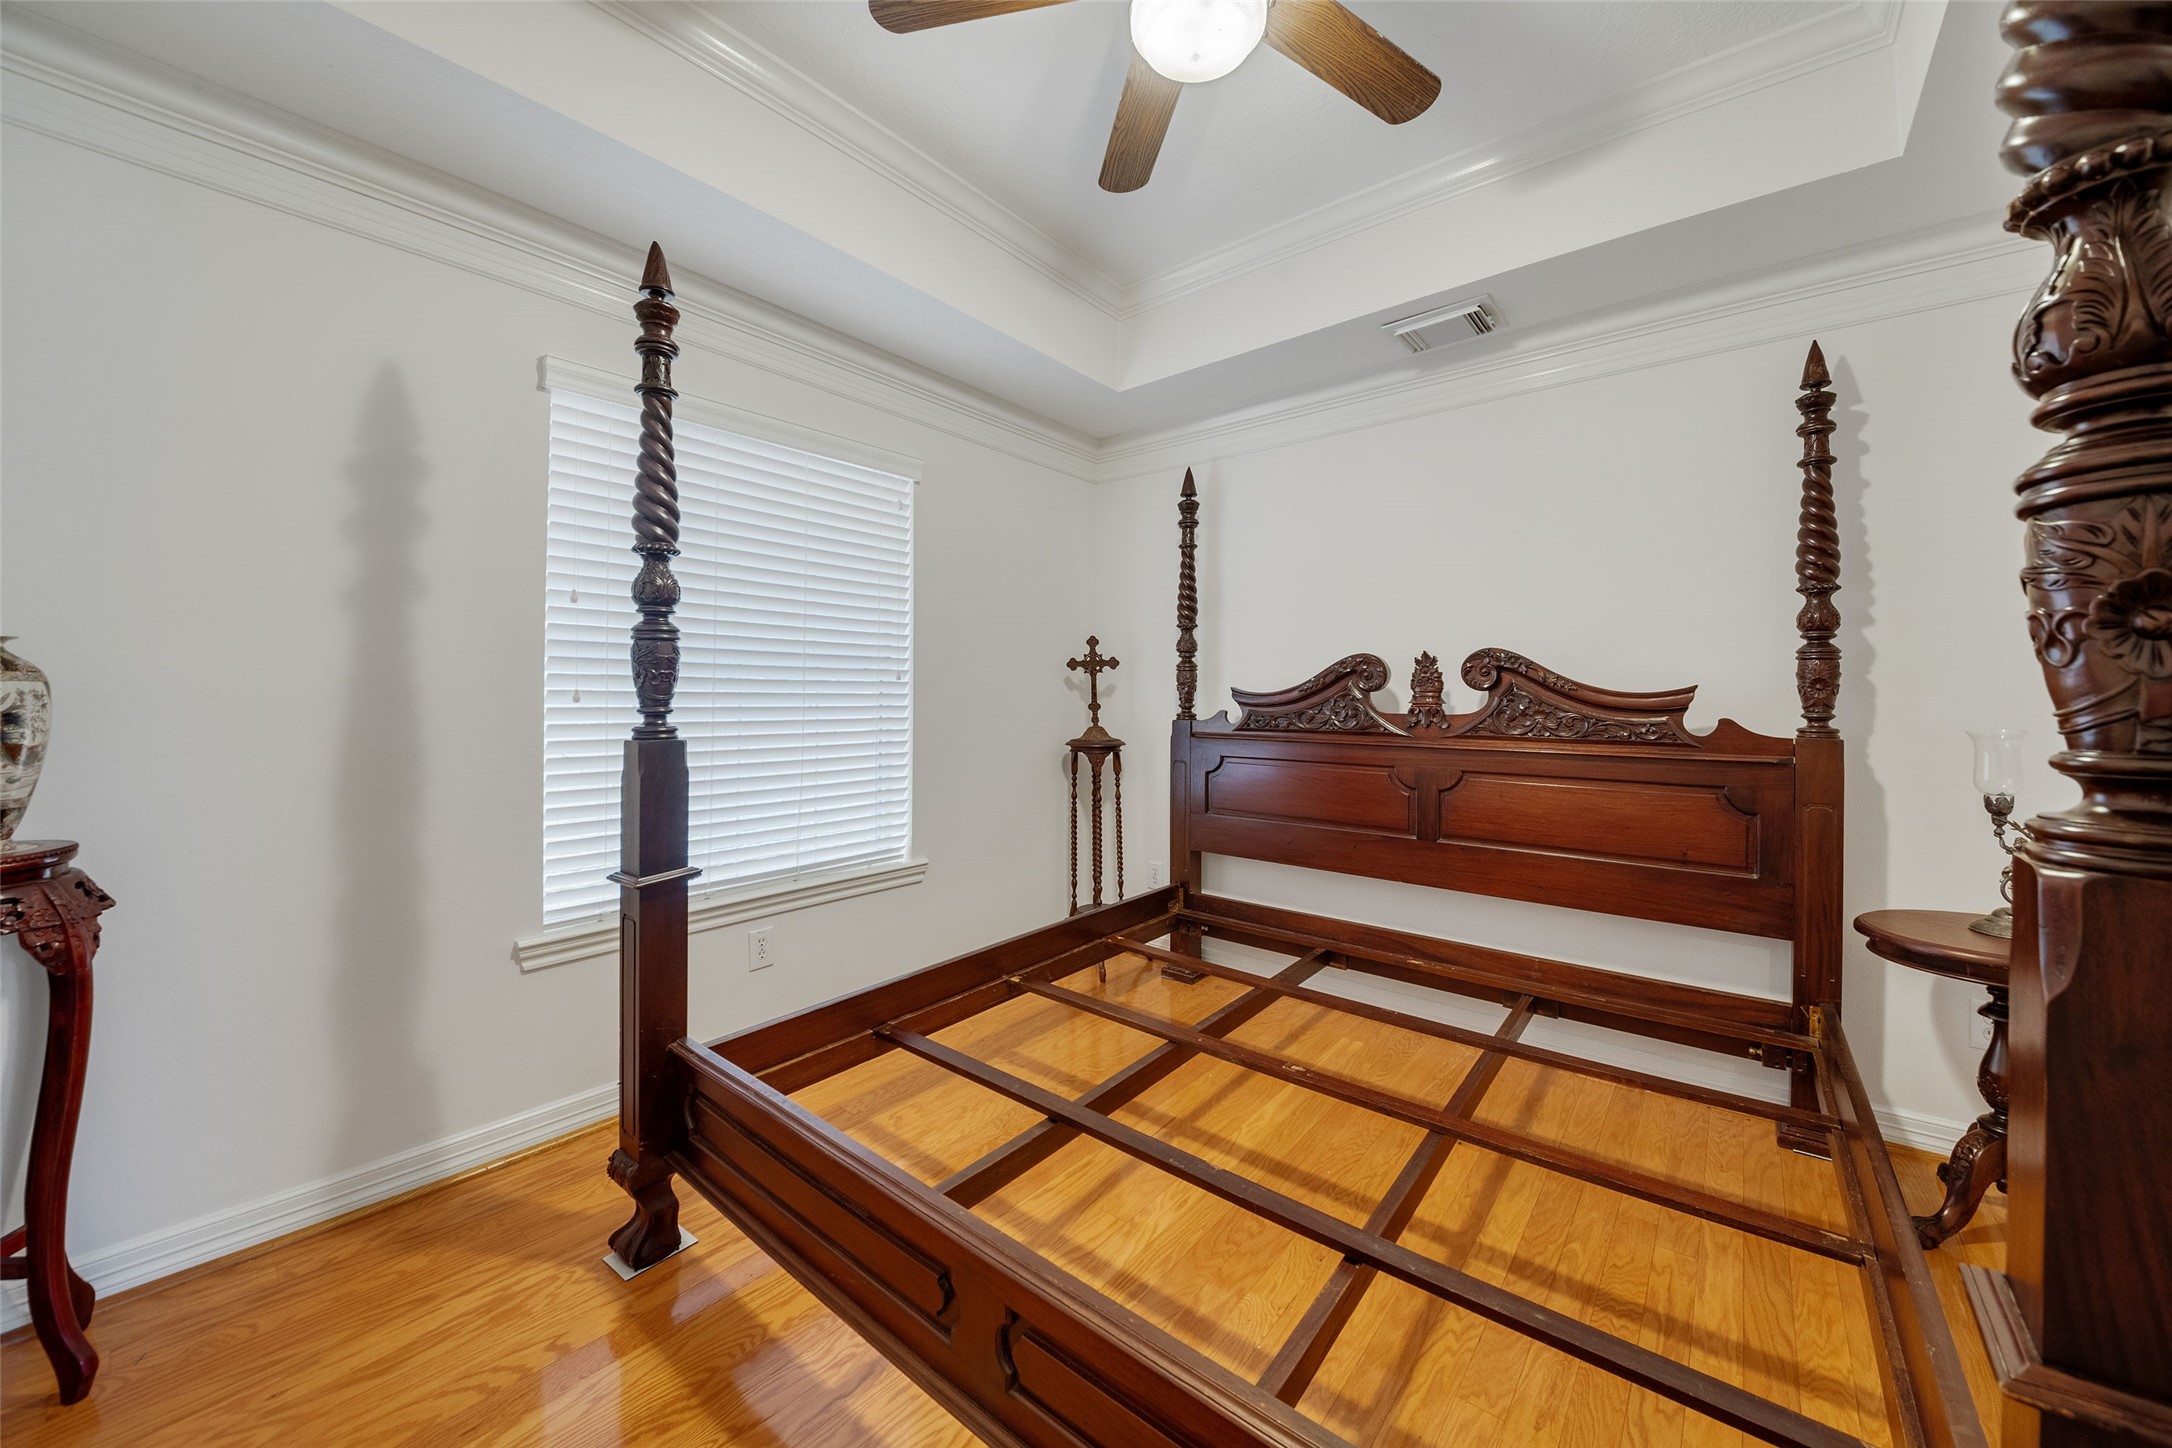 Third guest bedroom has tray ceiling, wood floors and crown molding.